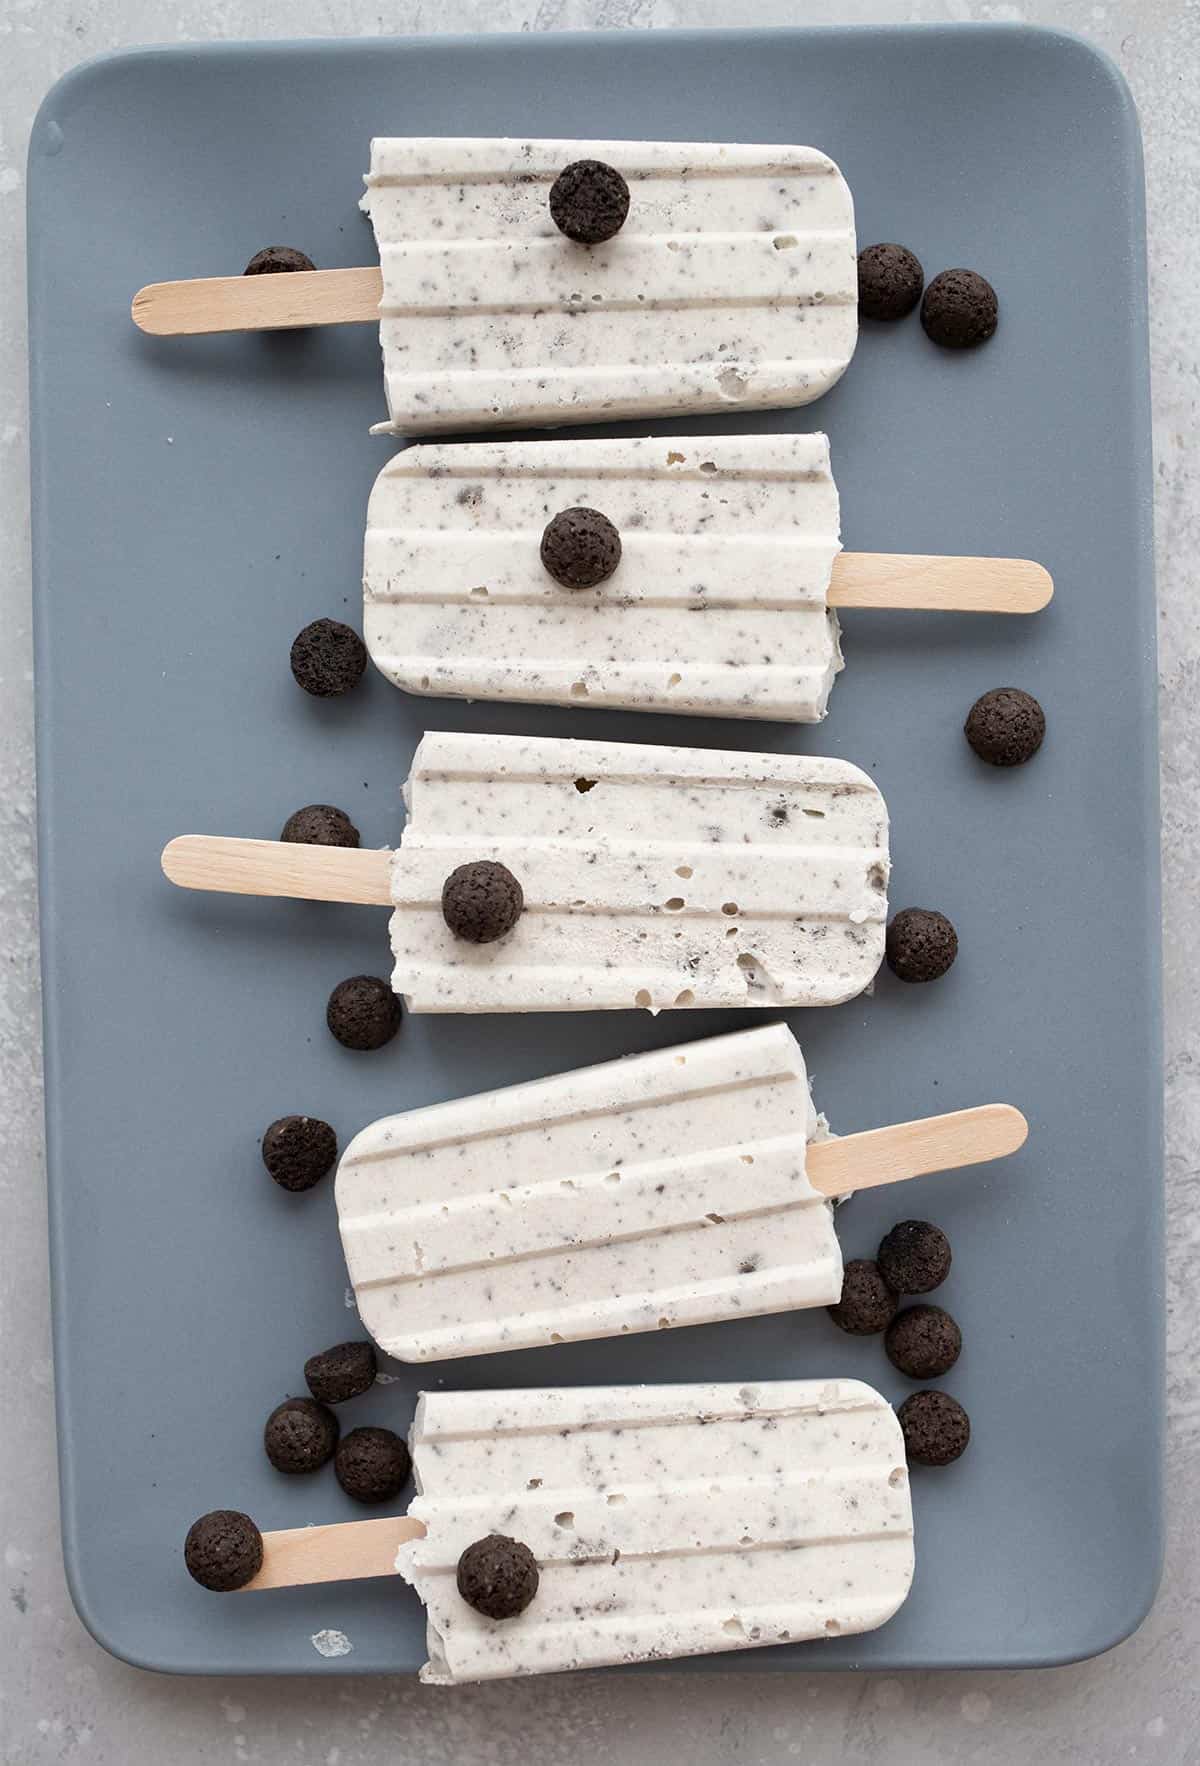 Top down image of keto cookies and cream popsicles on a blue plate.